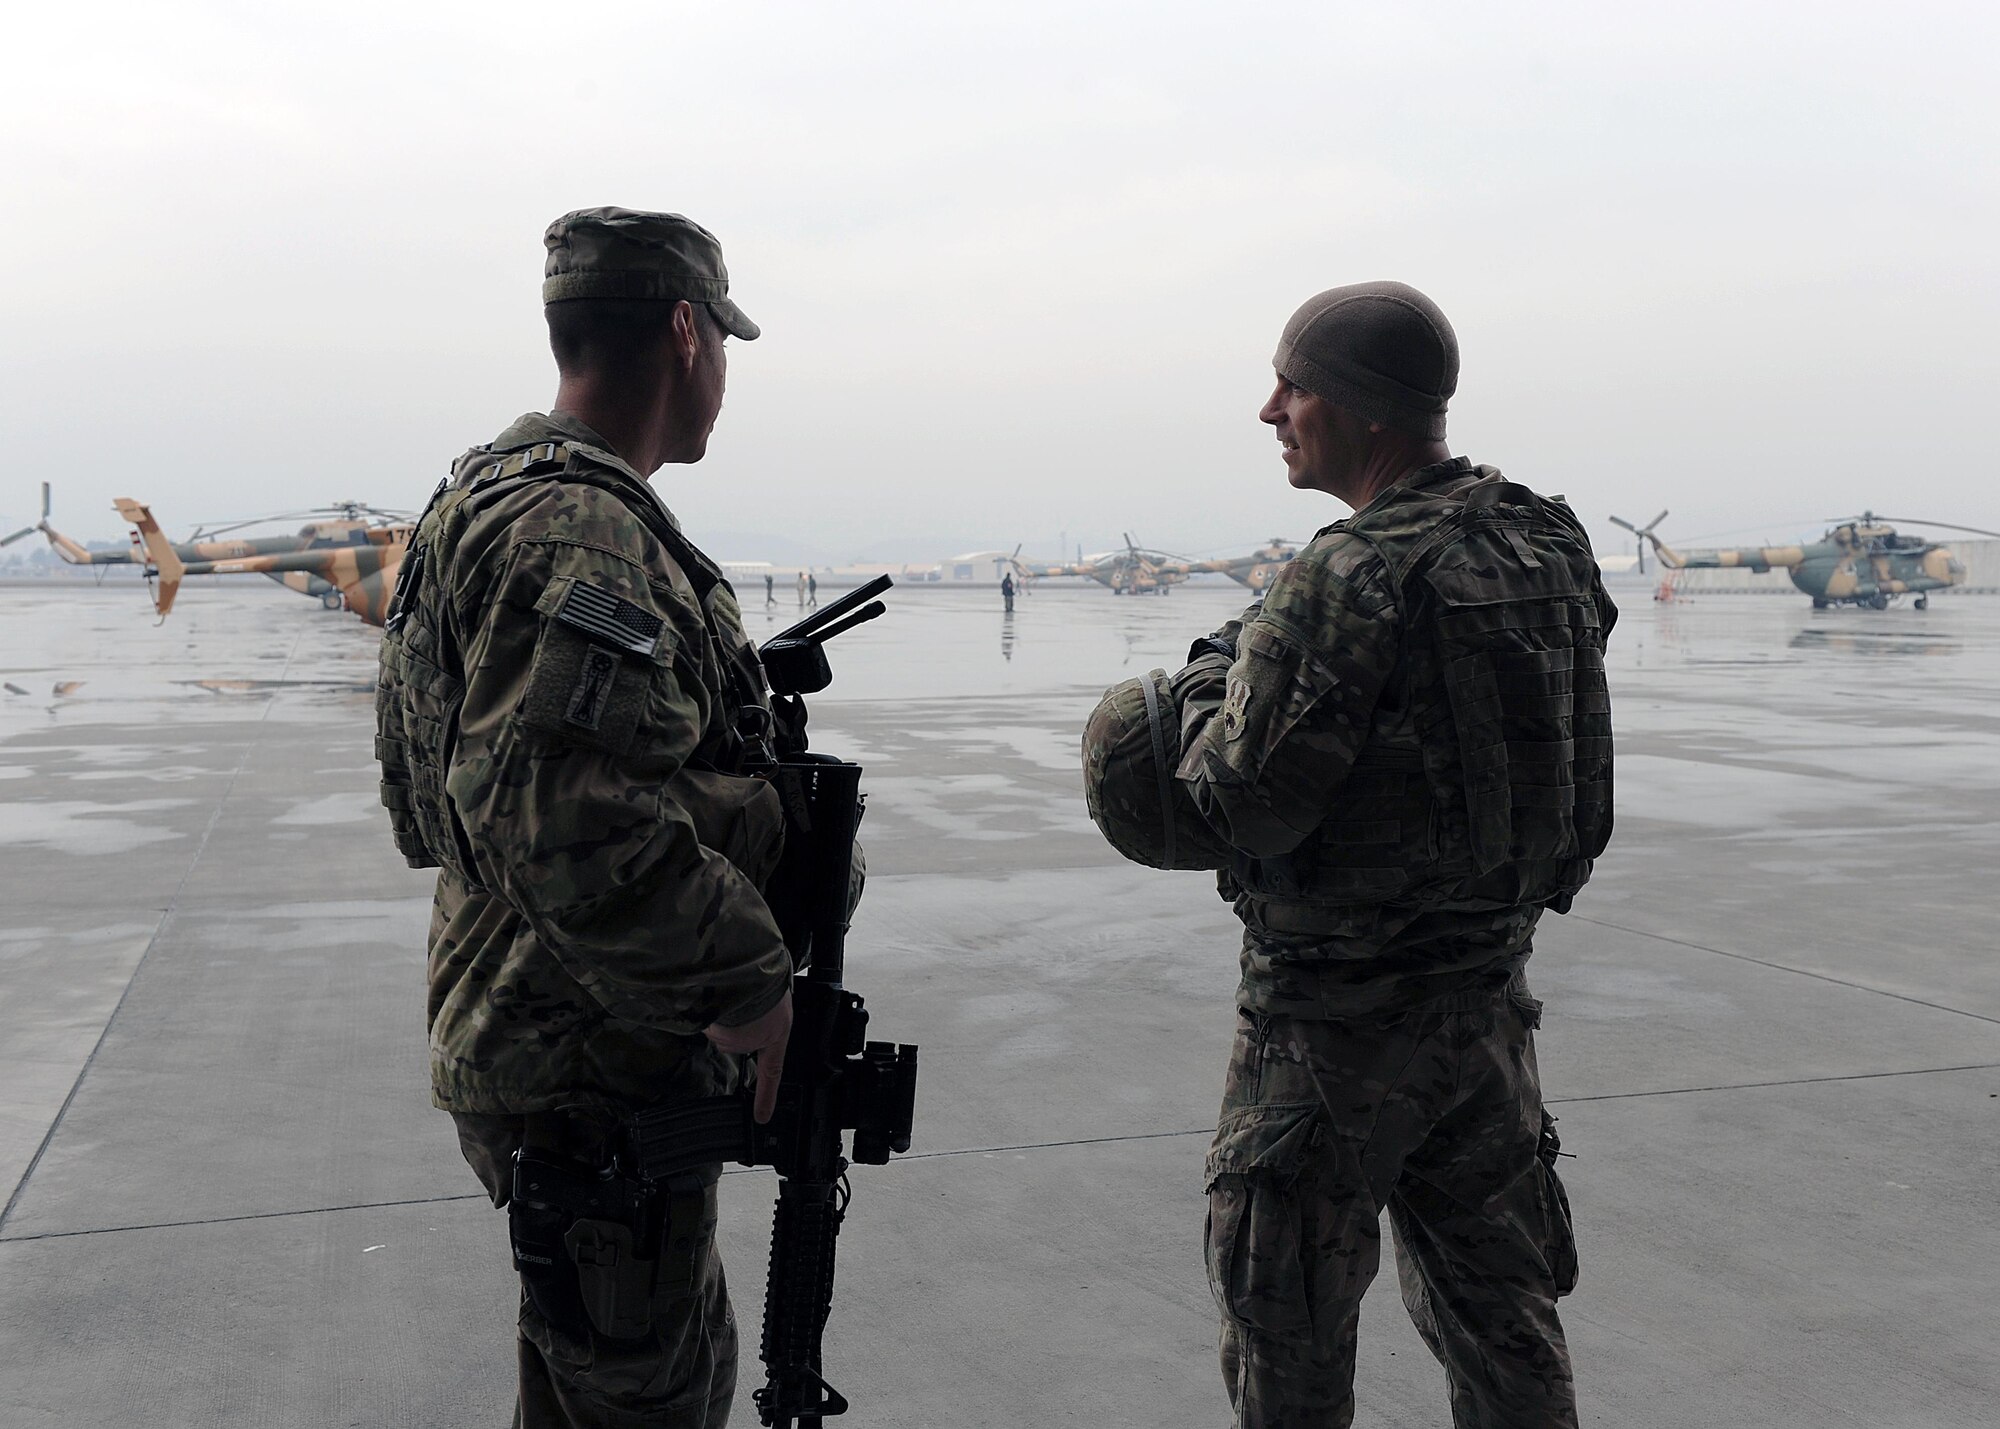 U.S. Air Force Tech. Sgt. Aleric Hebert, 455th Air Expeditionary Wing chaplain assistant, speaks with U.S. Air Force Master Sgt. James Ross, 438th Air Expeditionary Wing, during a Religious Support Team visit to Train, Advise, Assist Command-Air Feb. 15, 2015 at Forward Operating Base Oqab, Afghanistan. Hebert, accompanied by U.S. Air Force Maj. William Braswell, 455 AEW chaplain, travels throughout the U.S. Air Force Central Command Area of Responsibility engaging with Airmen and conducting church services to ensure deployed servicemembers are spiritually fit to fight.(U.S. Air Force photo by Staff Sgt. Whitney Amstutz/released)